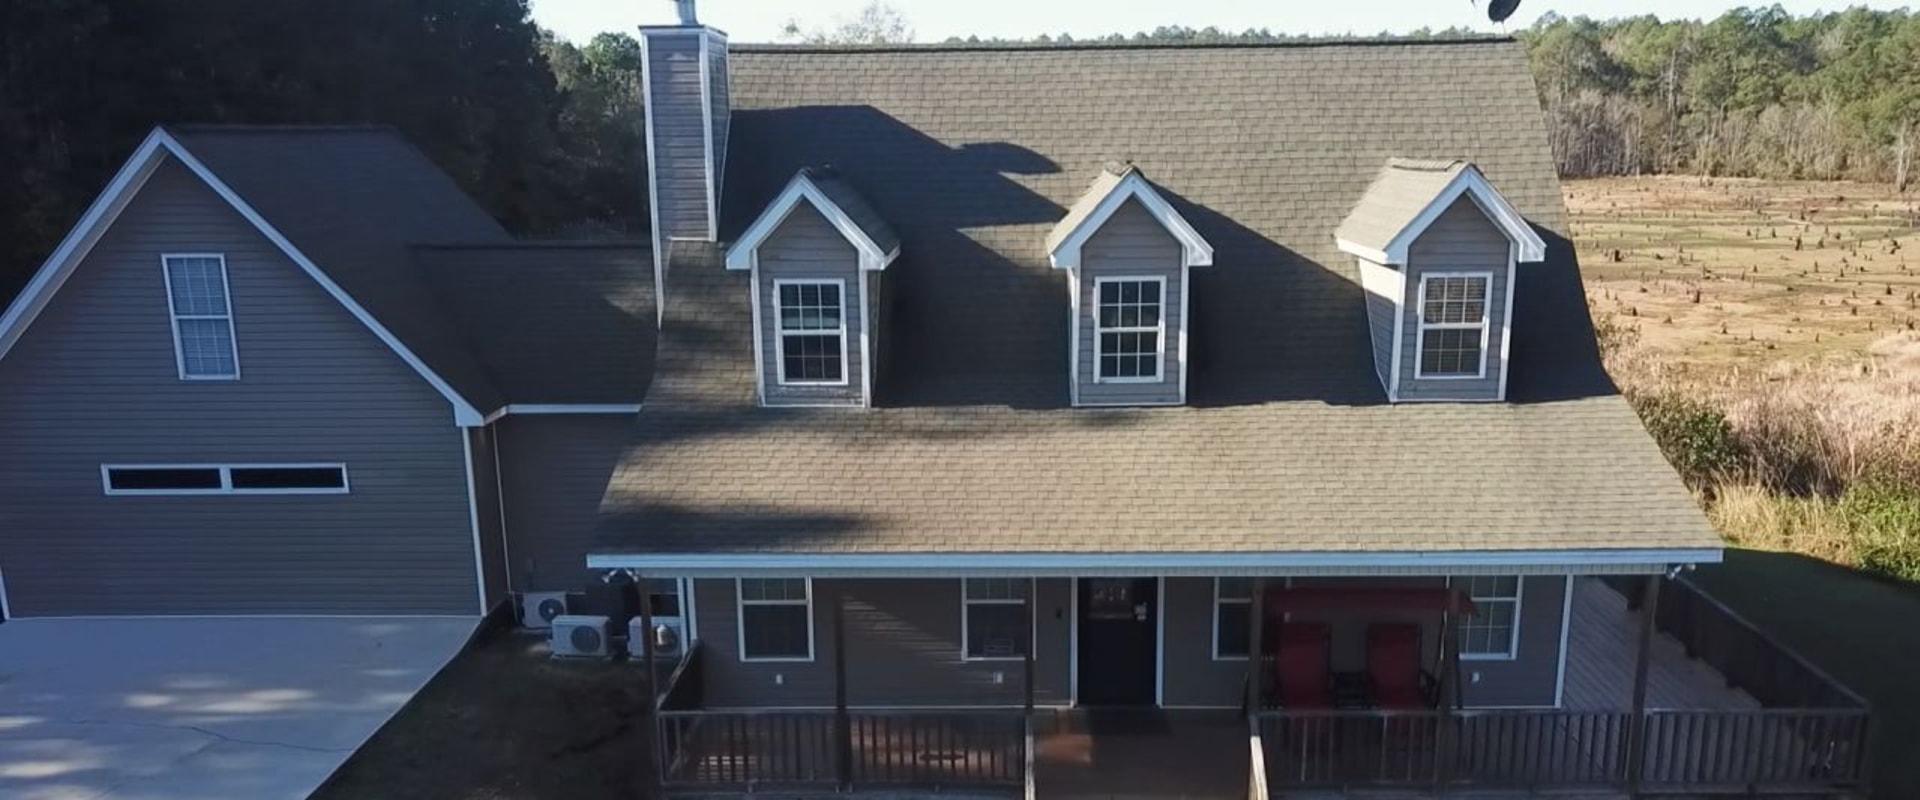 Why did home depot stop installing roofs?